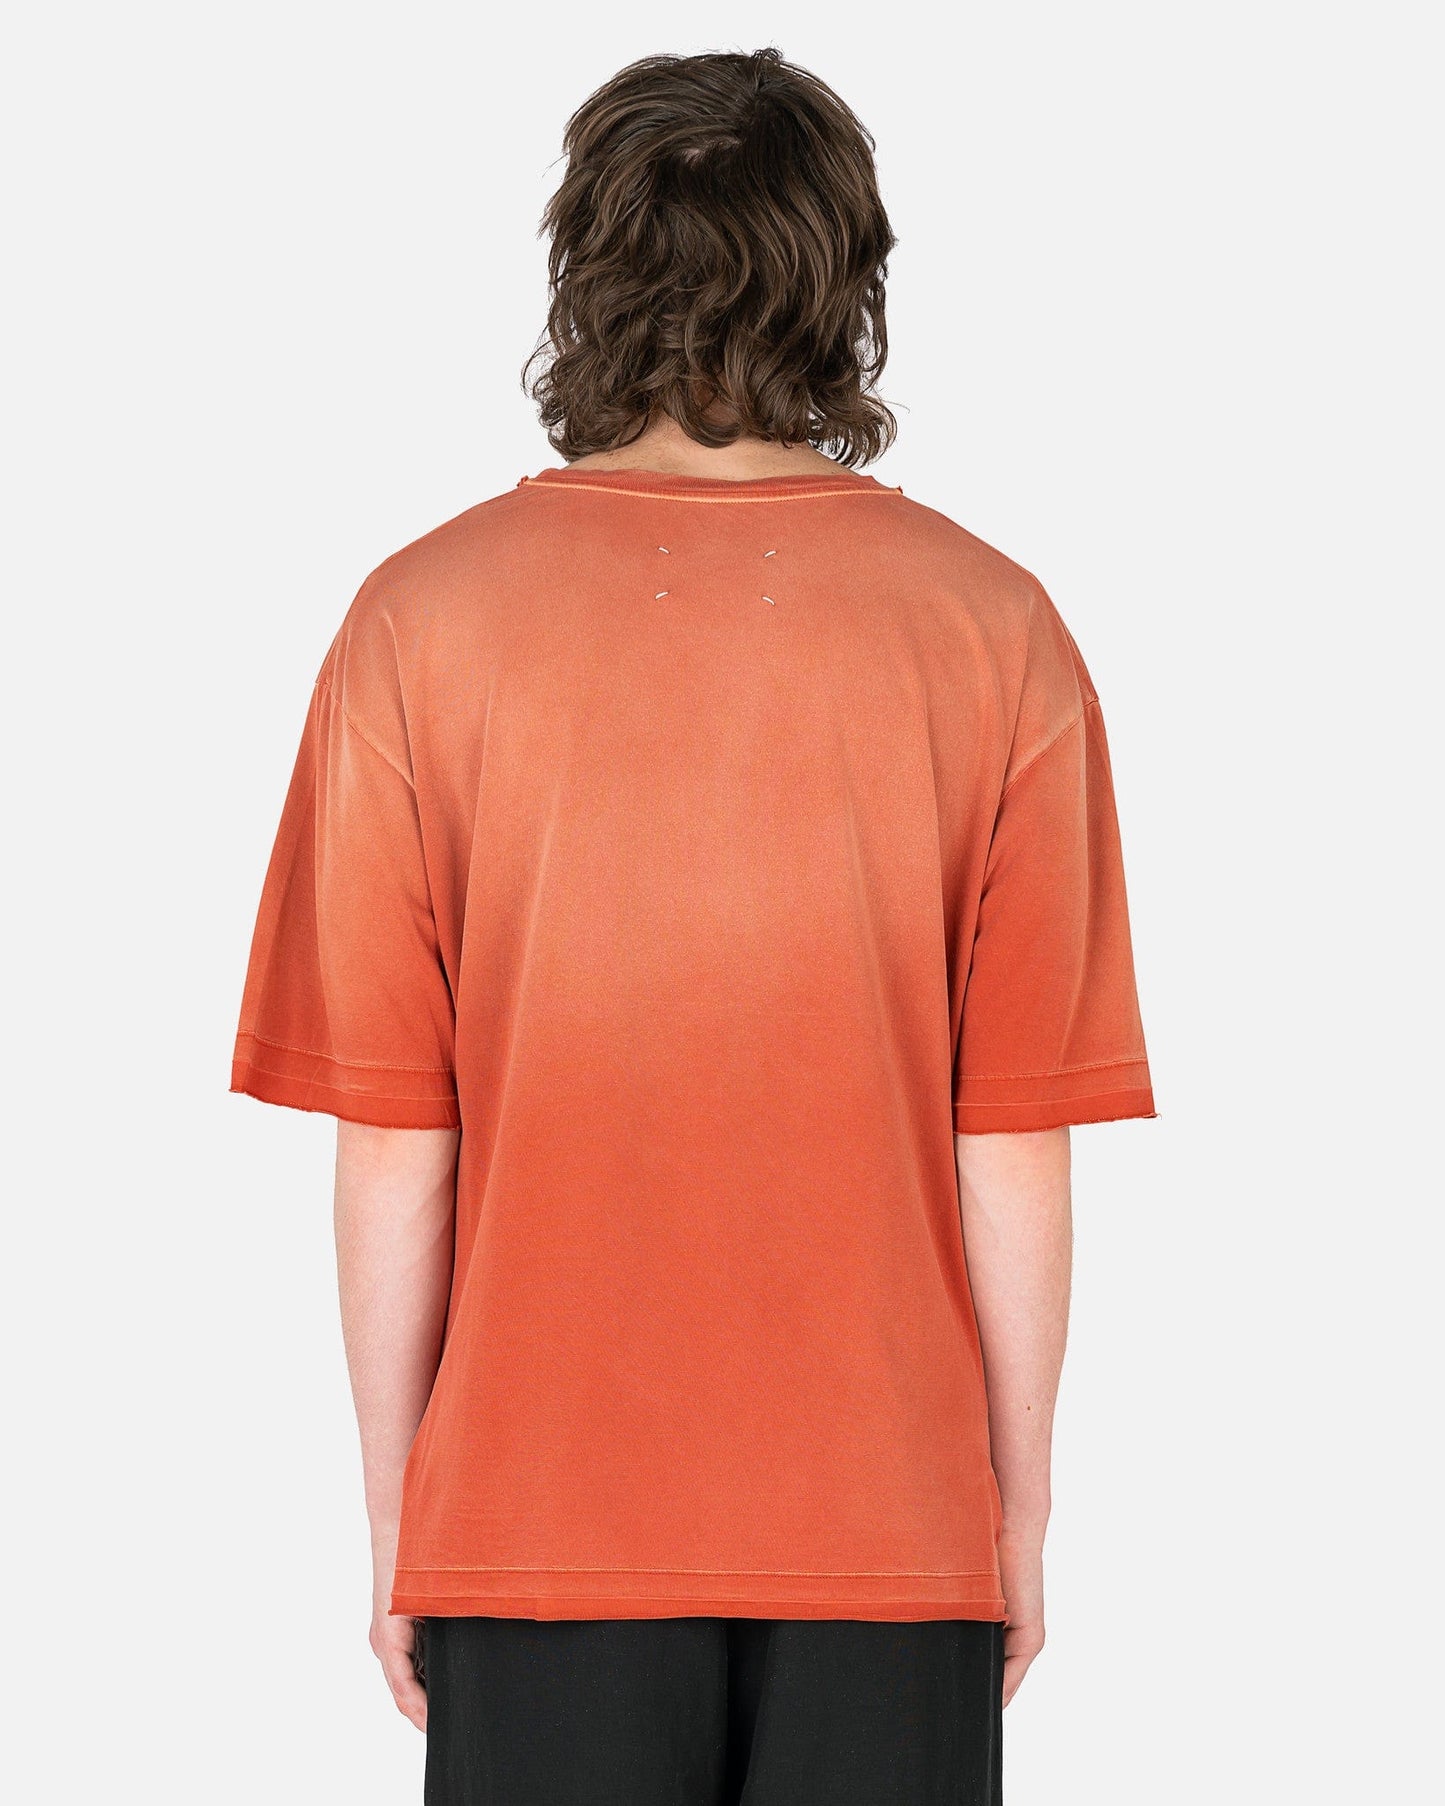 Maison Margiela Men's T-Shirts Weathered Graphic T-Shirt in Red